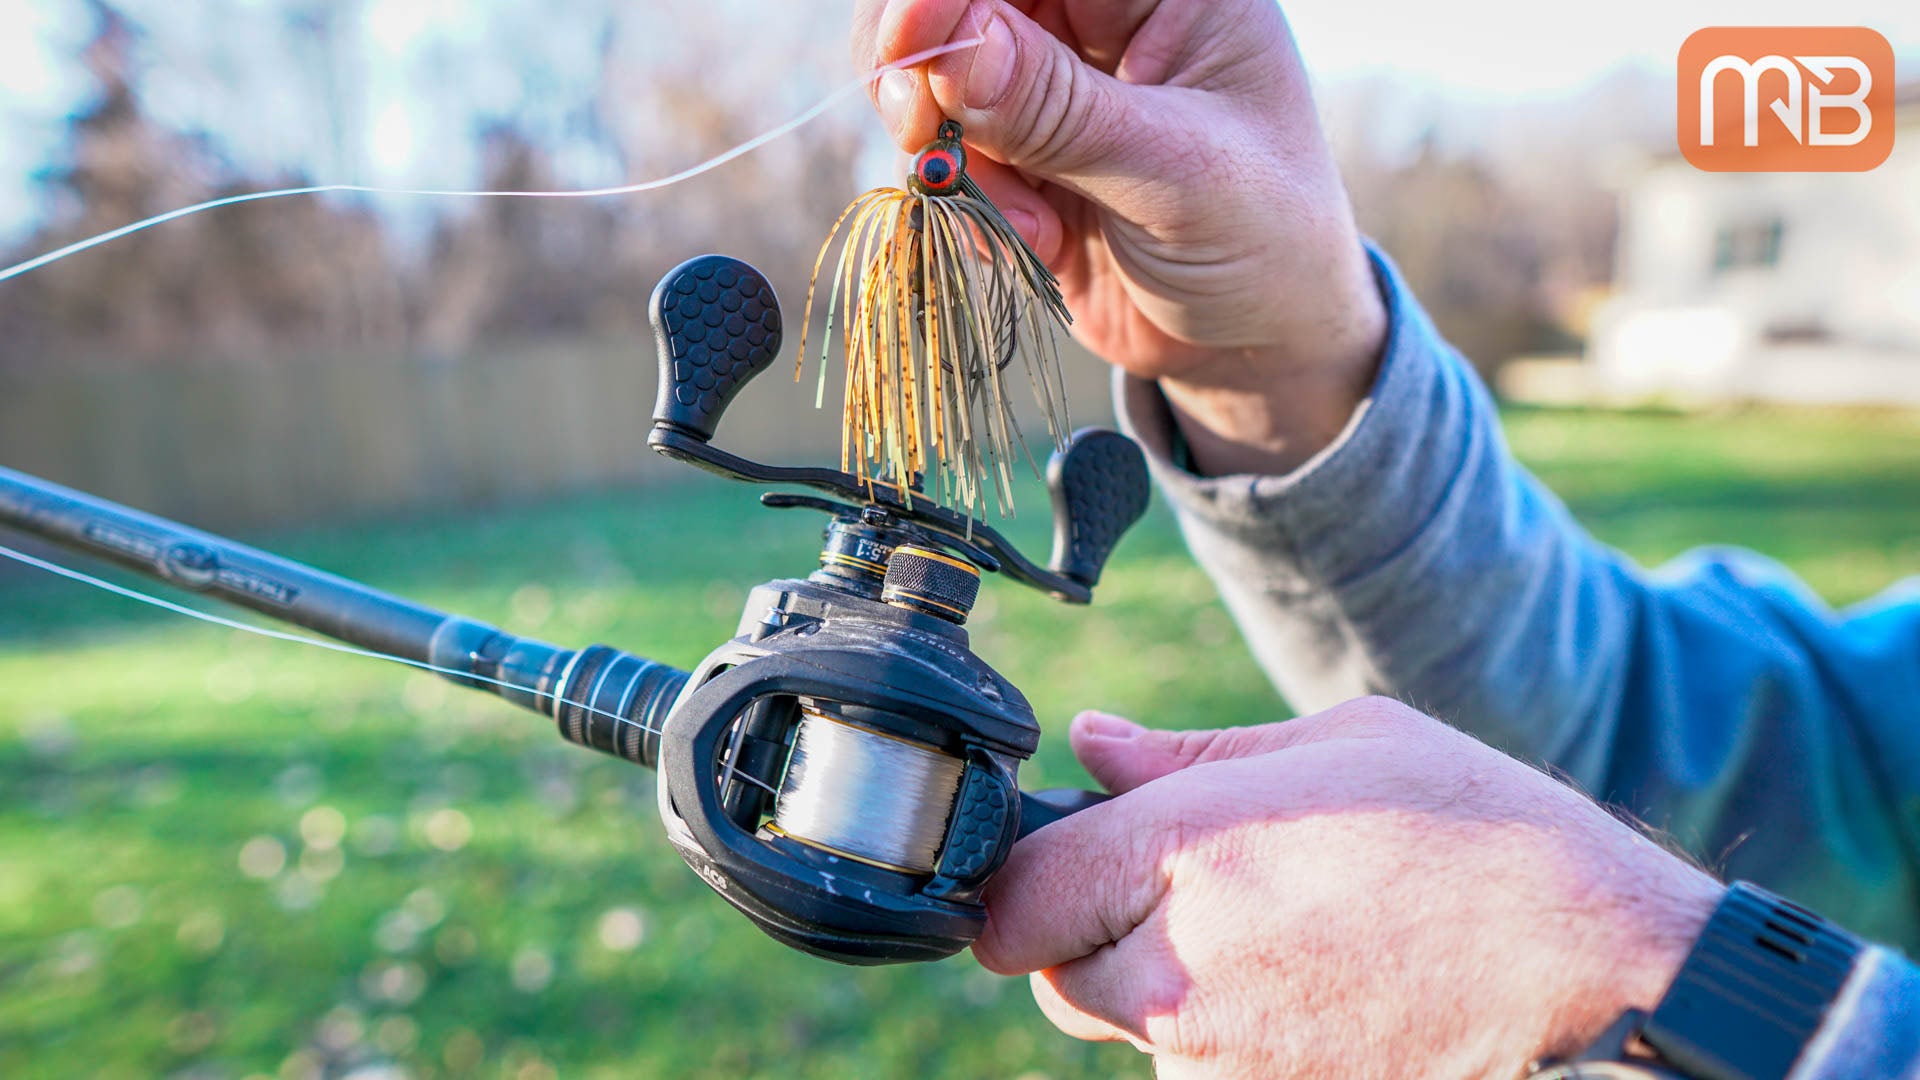 How To STOP Getting Backlashes With Your Baitcasting Reel